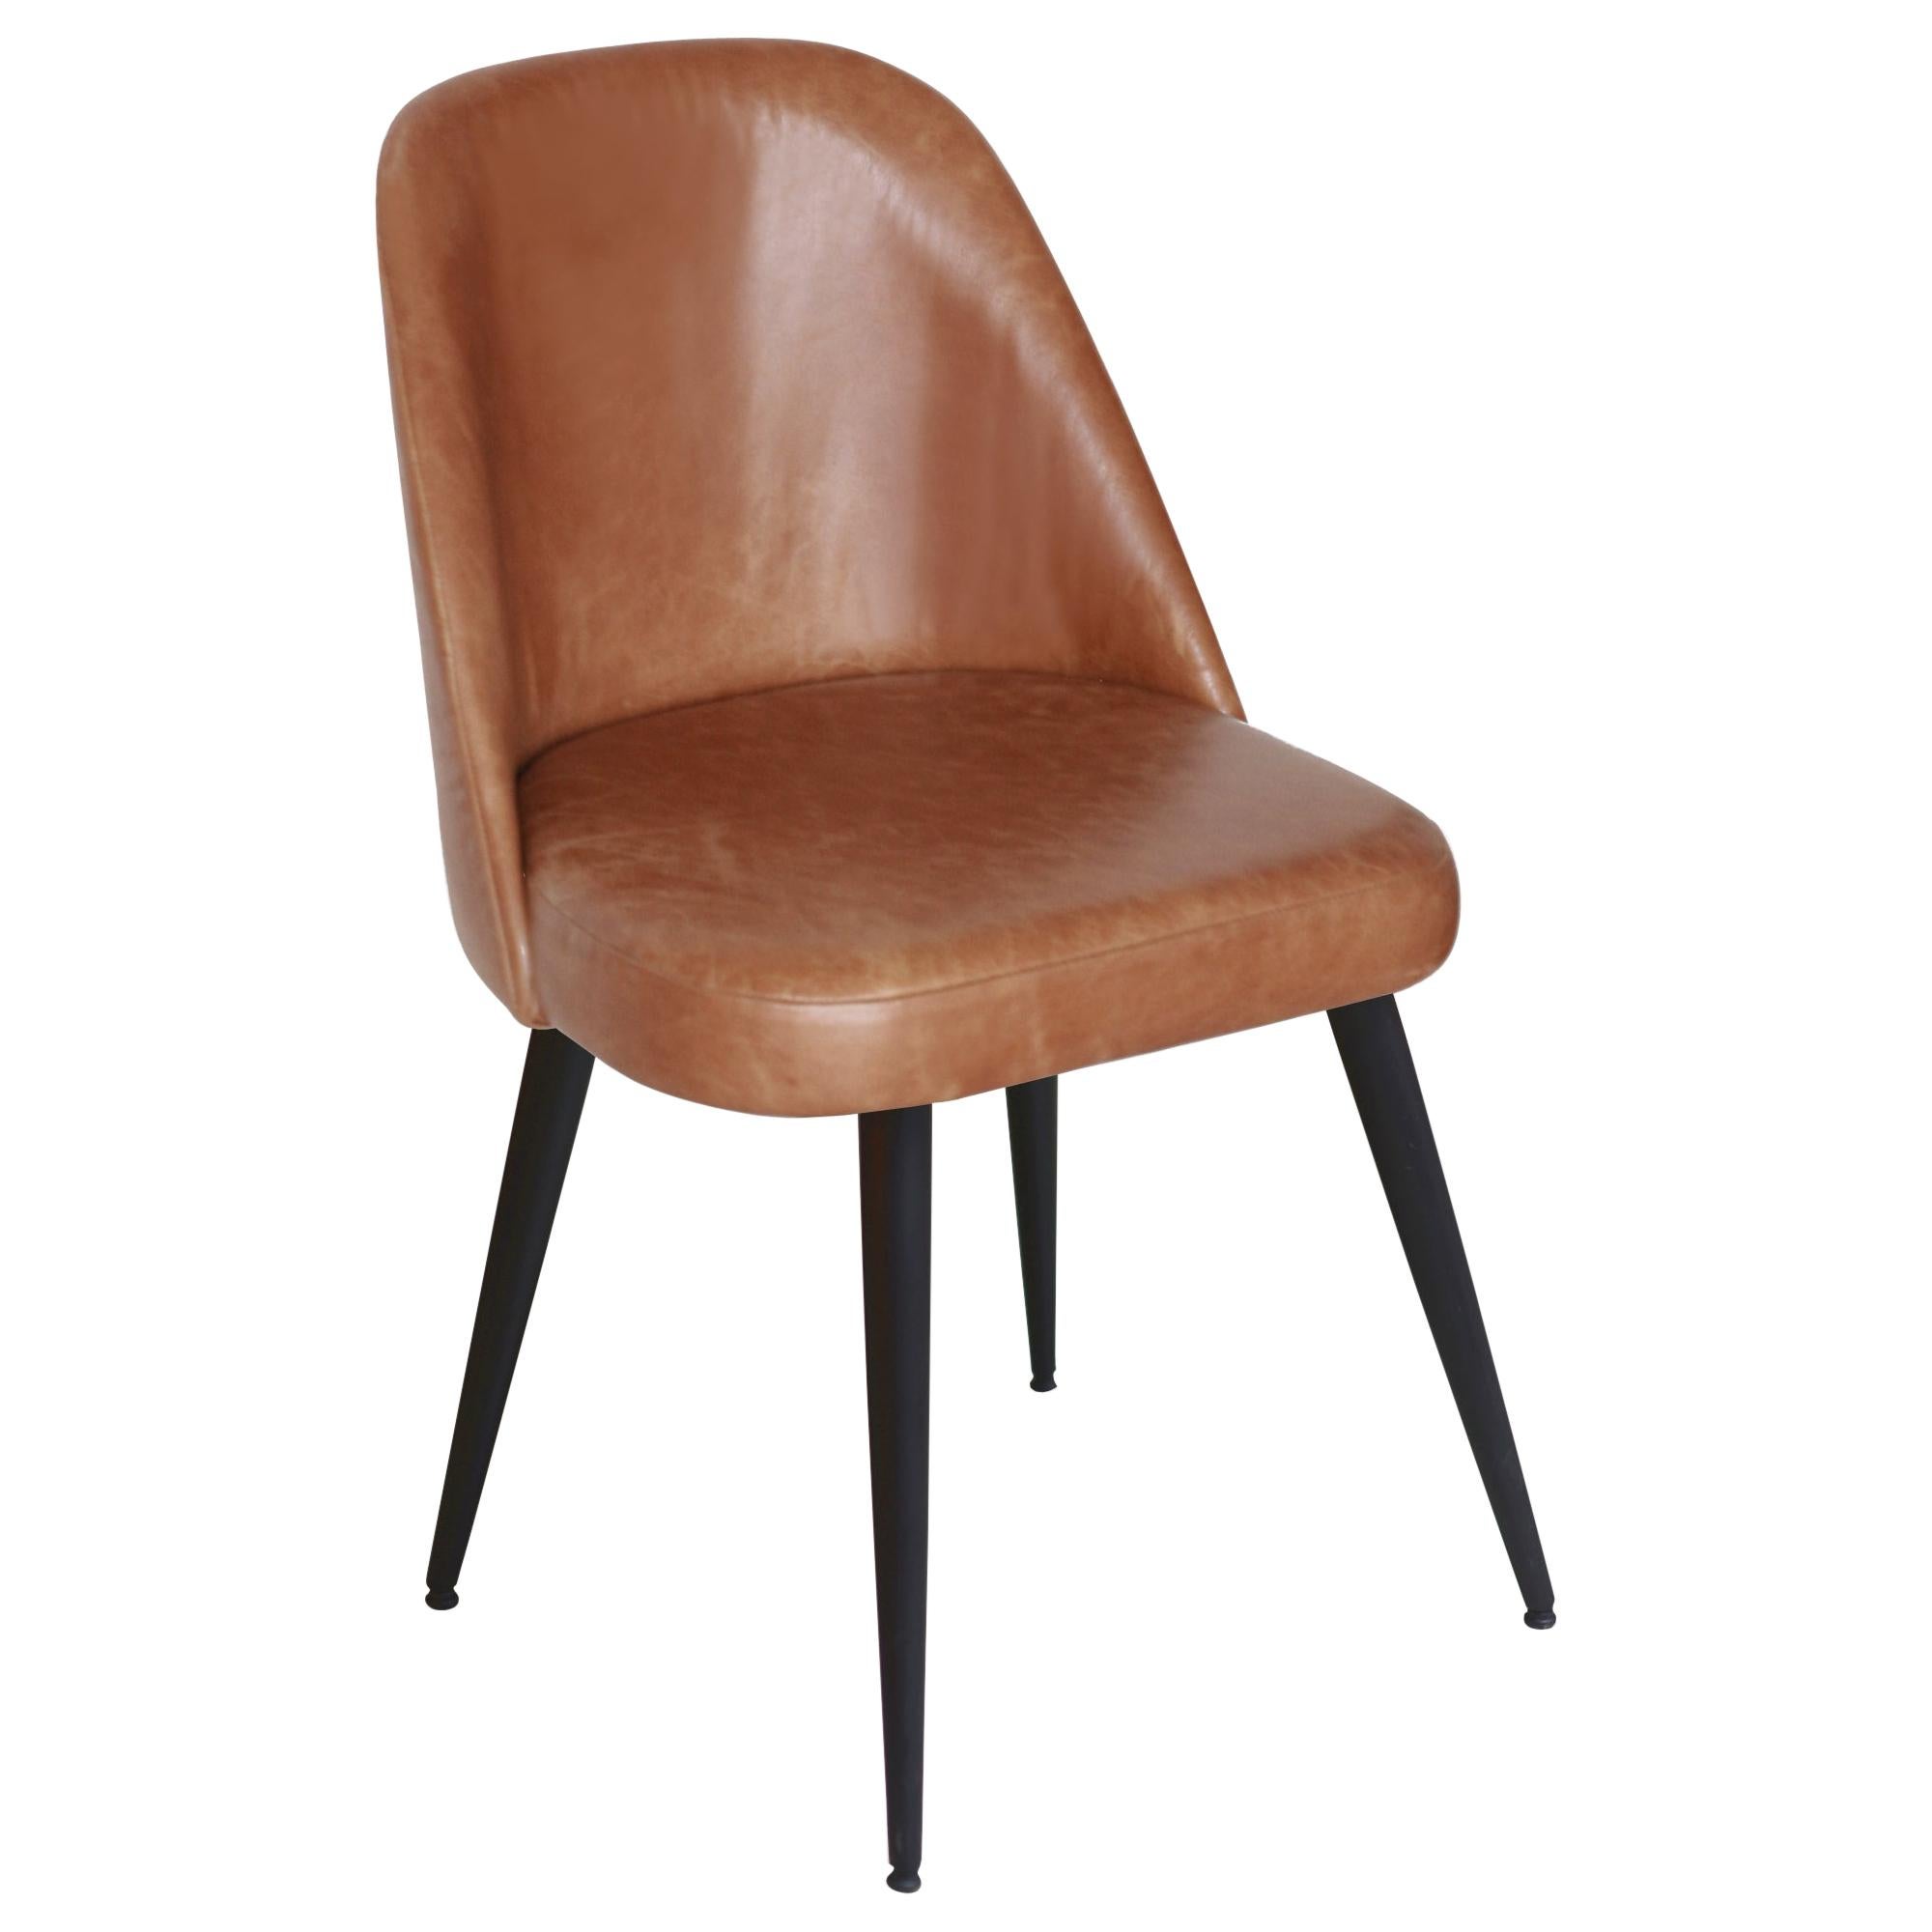 Modern Honey Leather Dining Chair with Steel Base Black Conical Legs